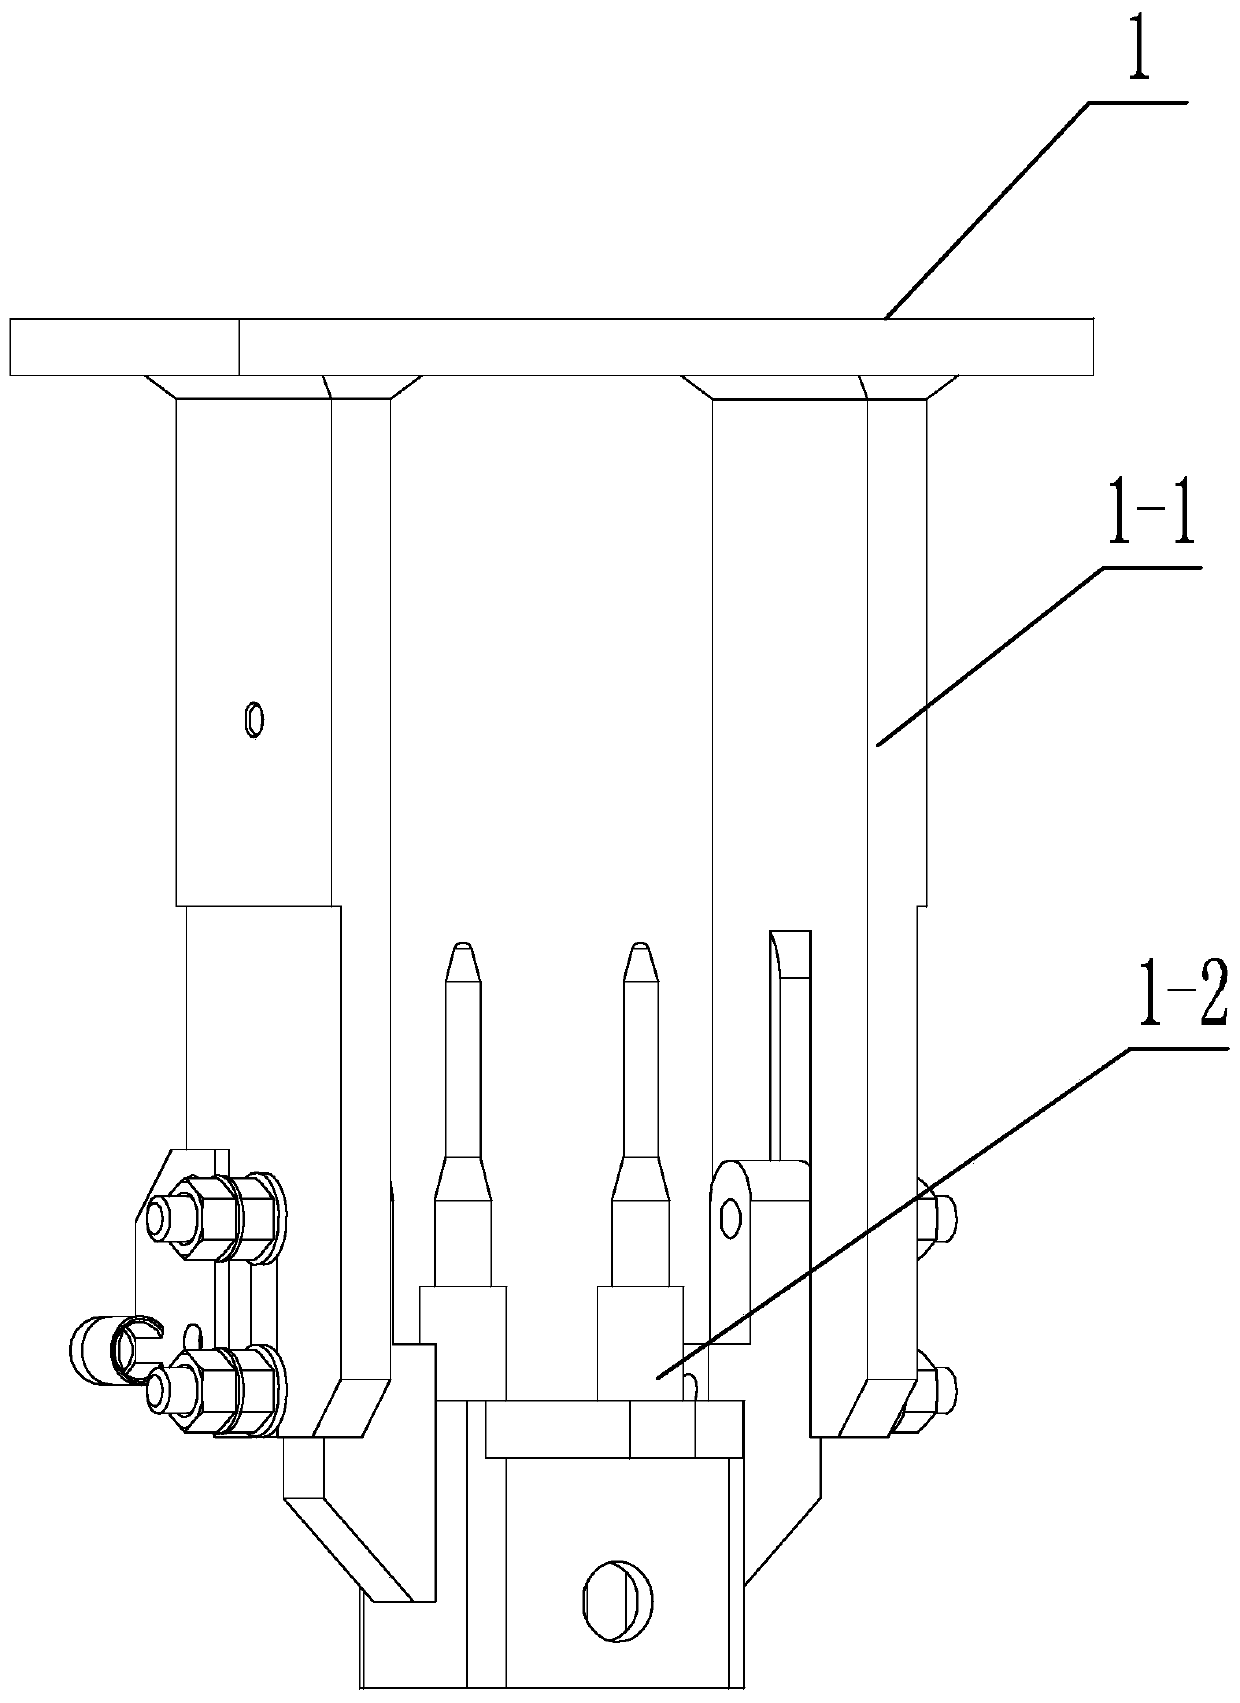 An automatic cable plugging and unplugging device for mass centroid measurement